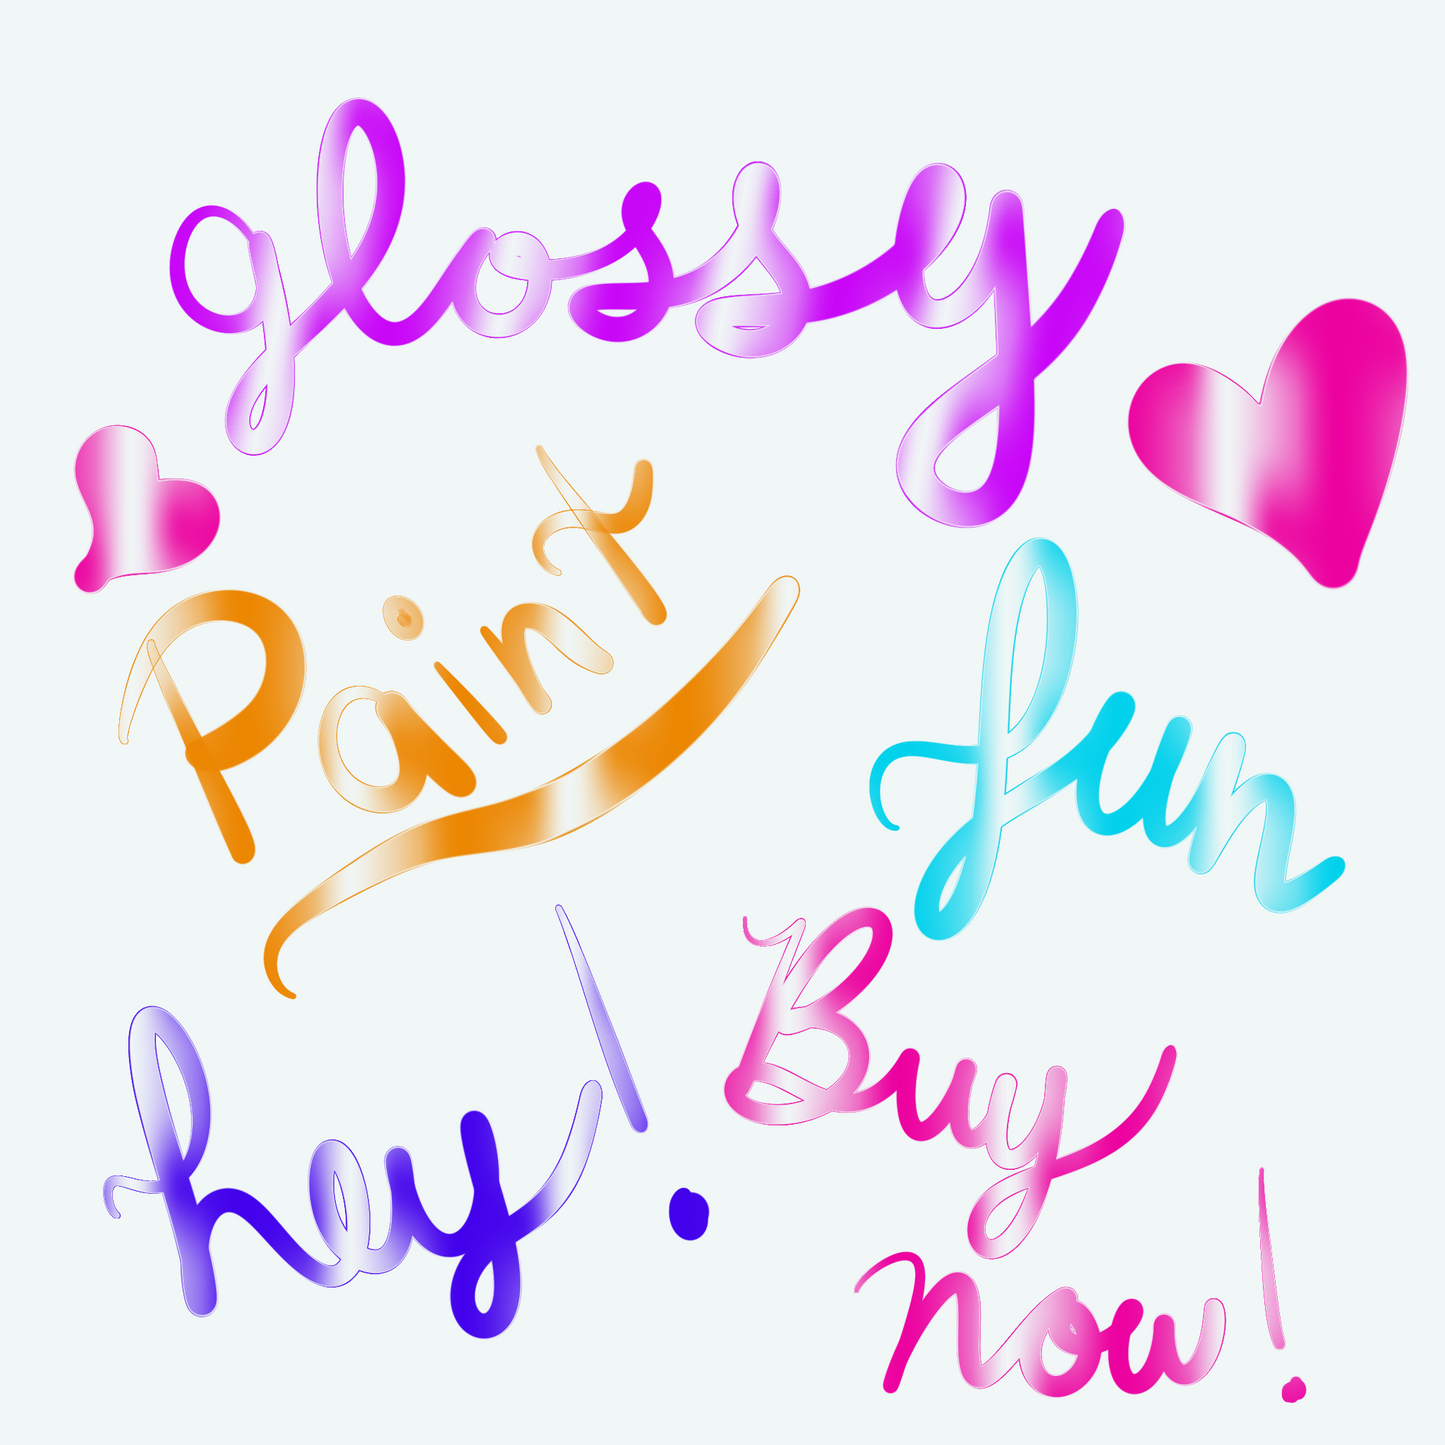 Glossy Brush for Procreate - great for calligraphy and lettering!